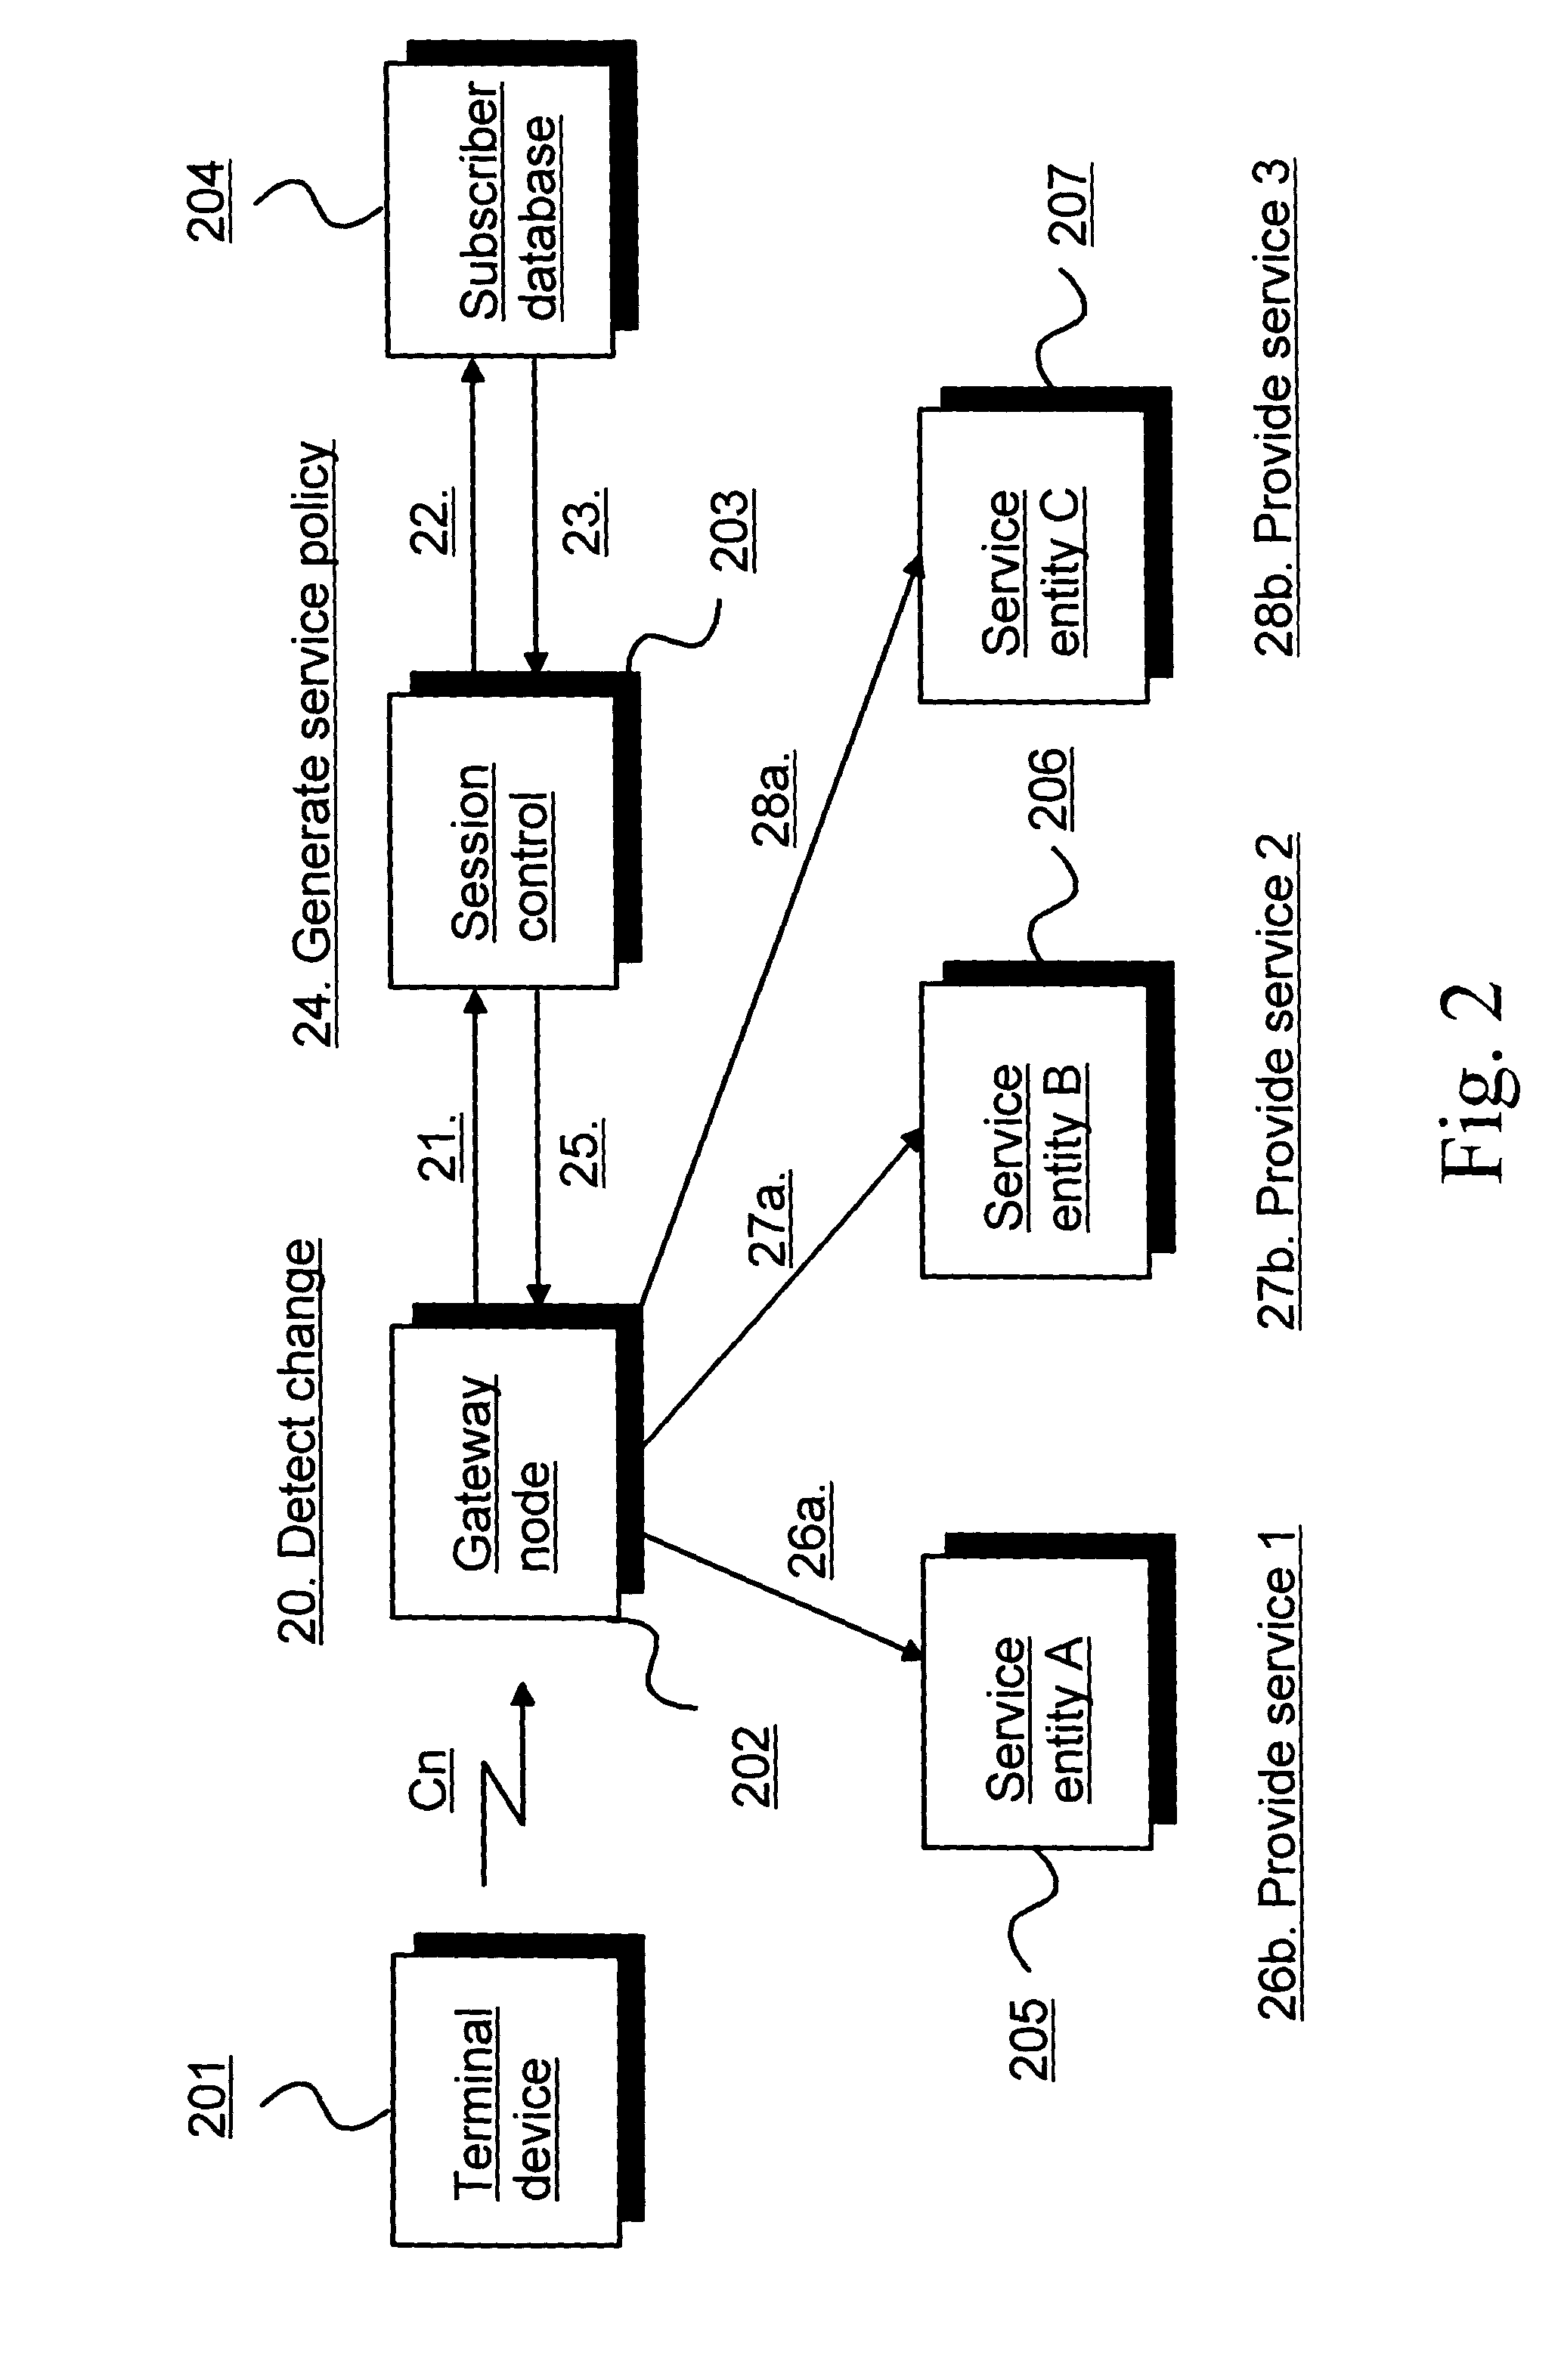 Controlling services in a packet data network